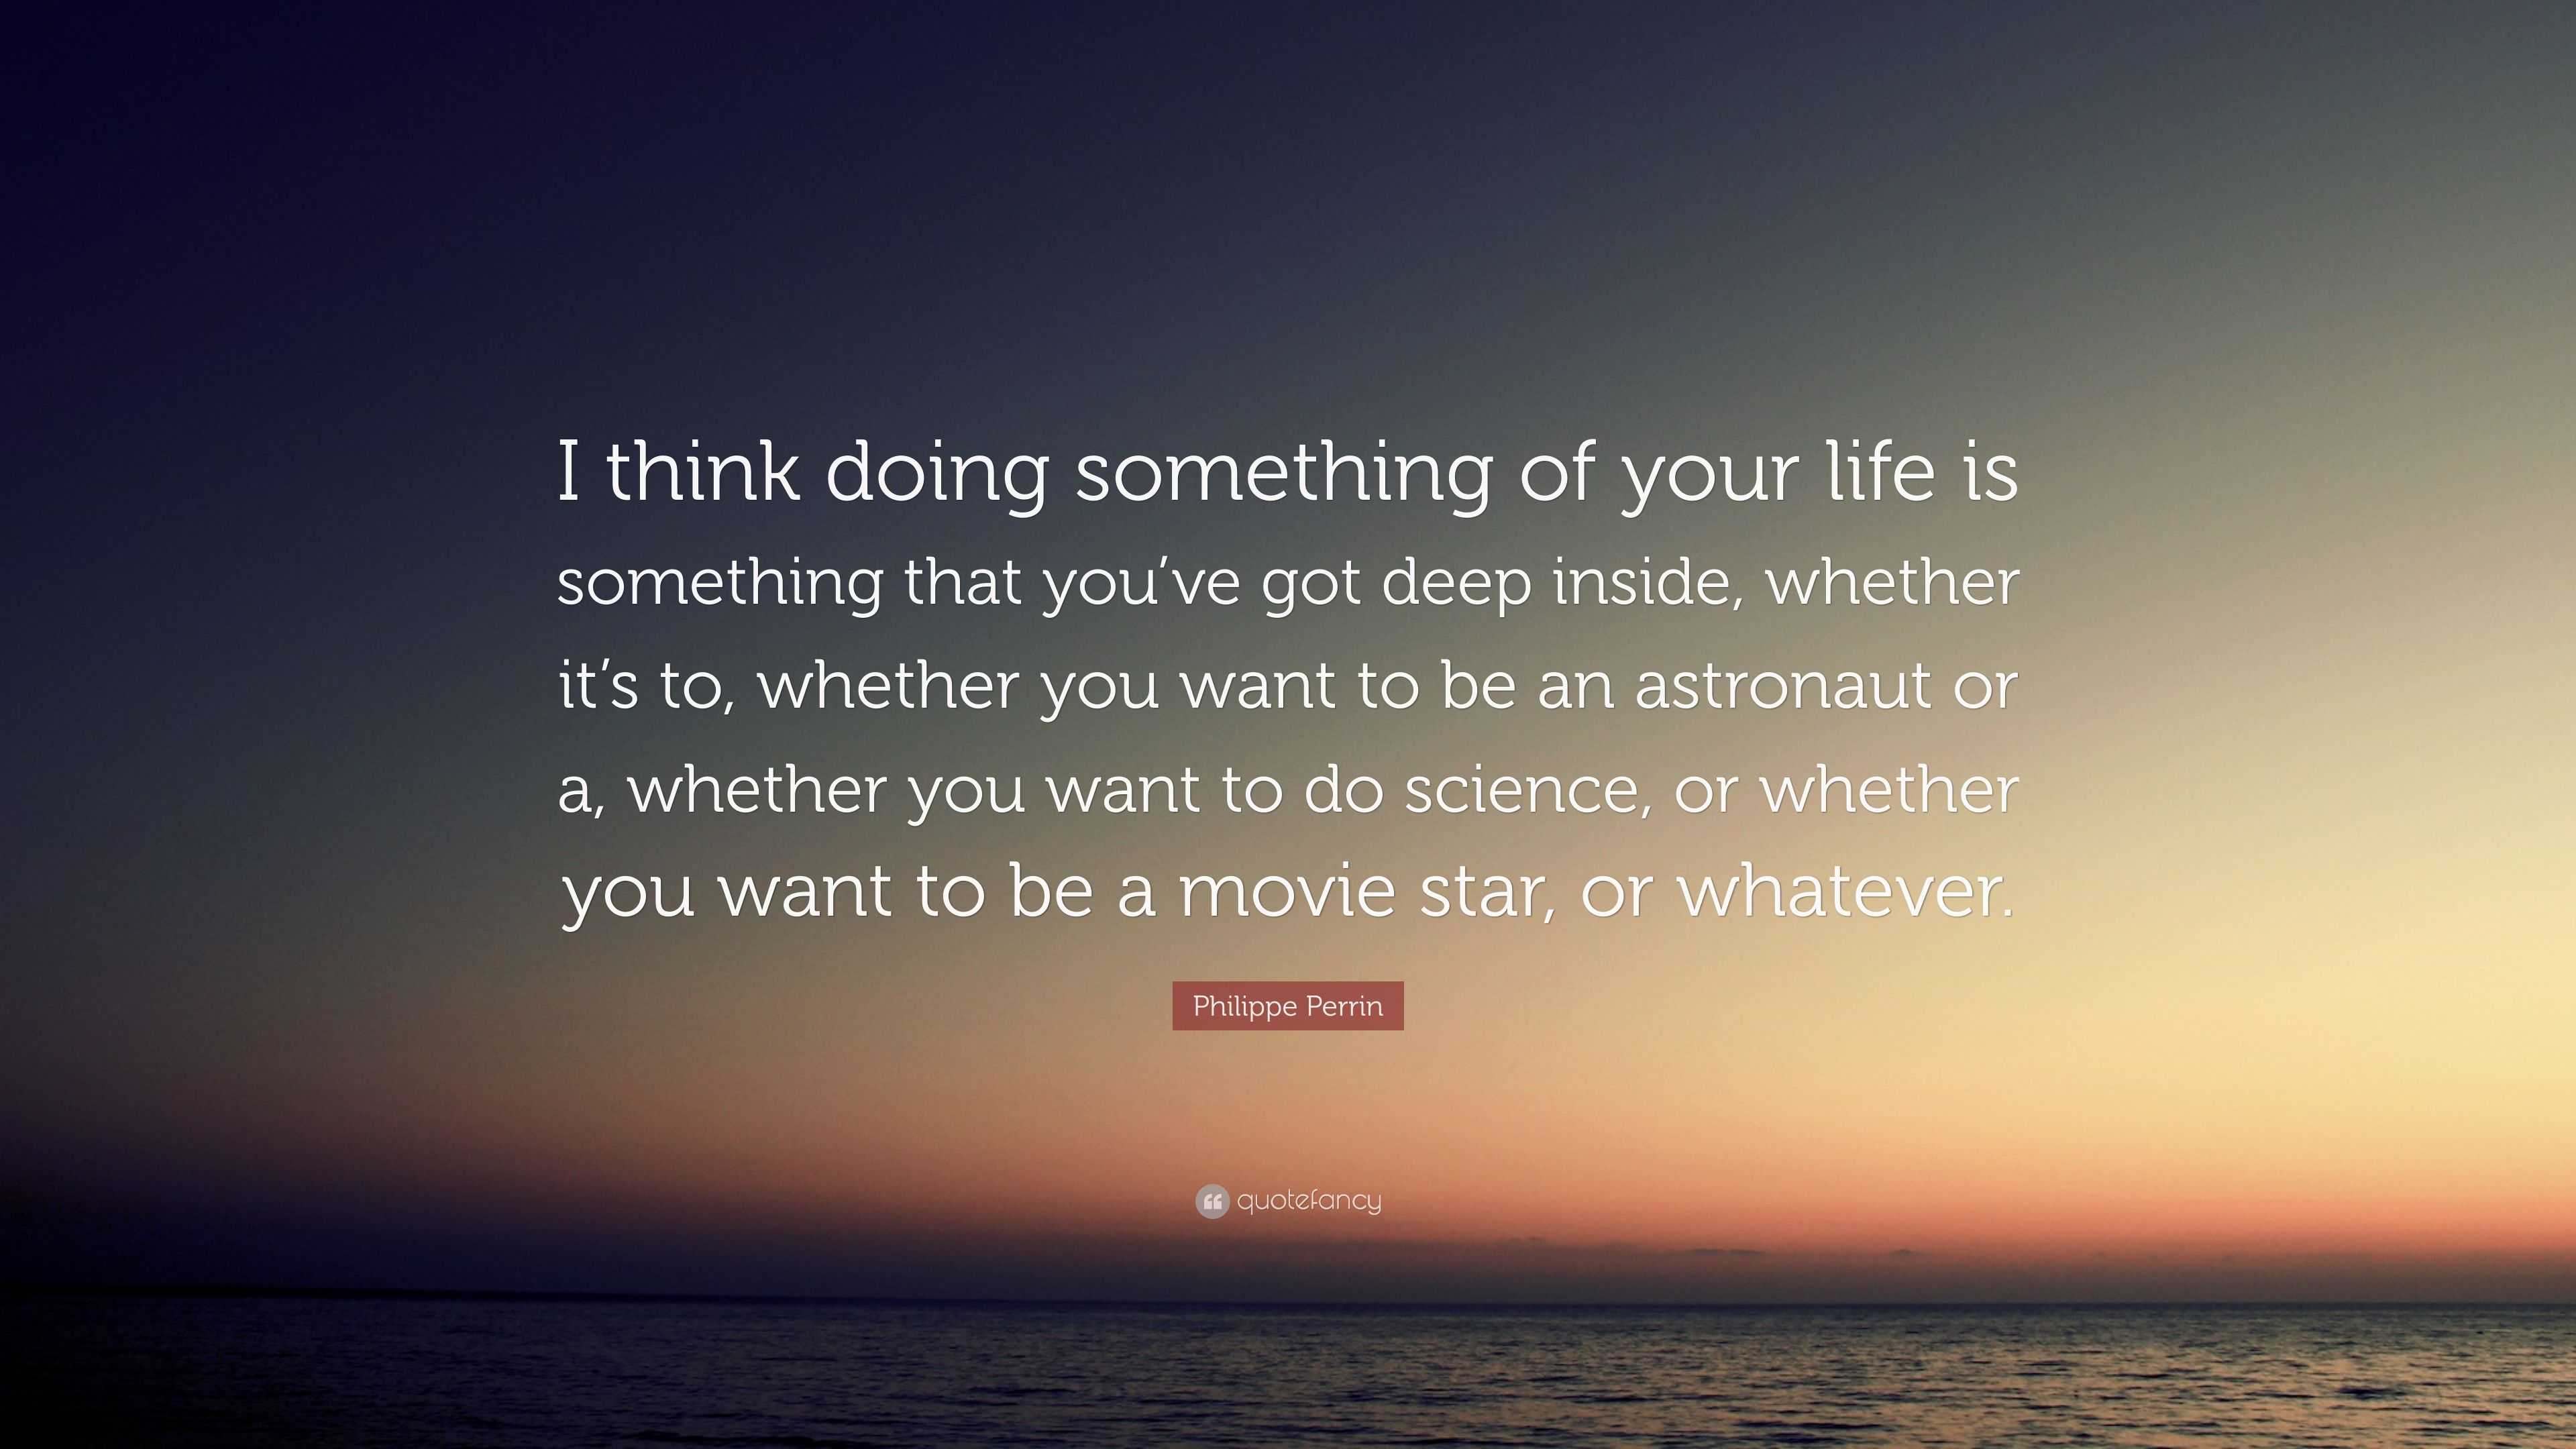 Philippe Perrin Quote: “I think doing something of your life is